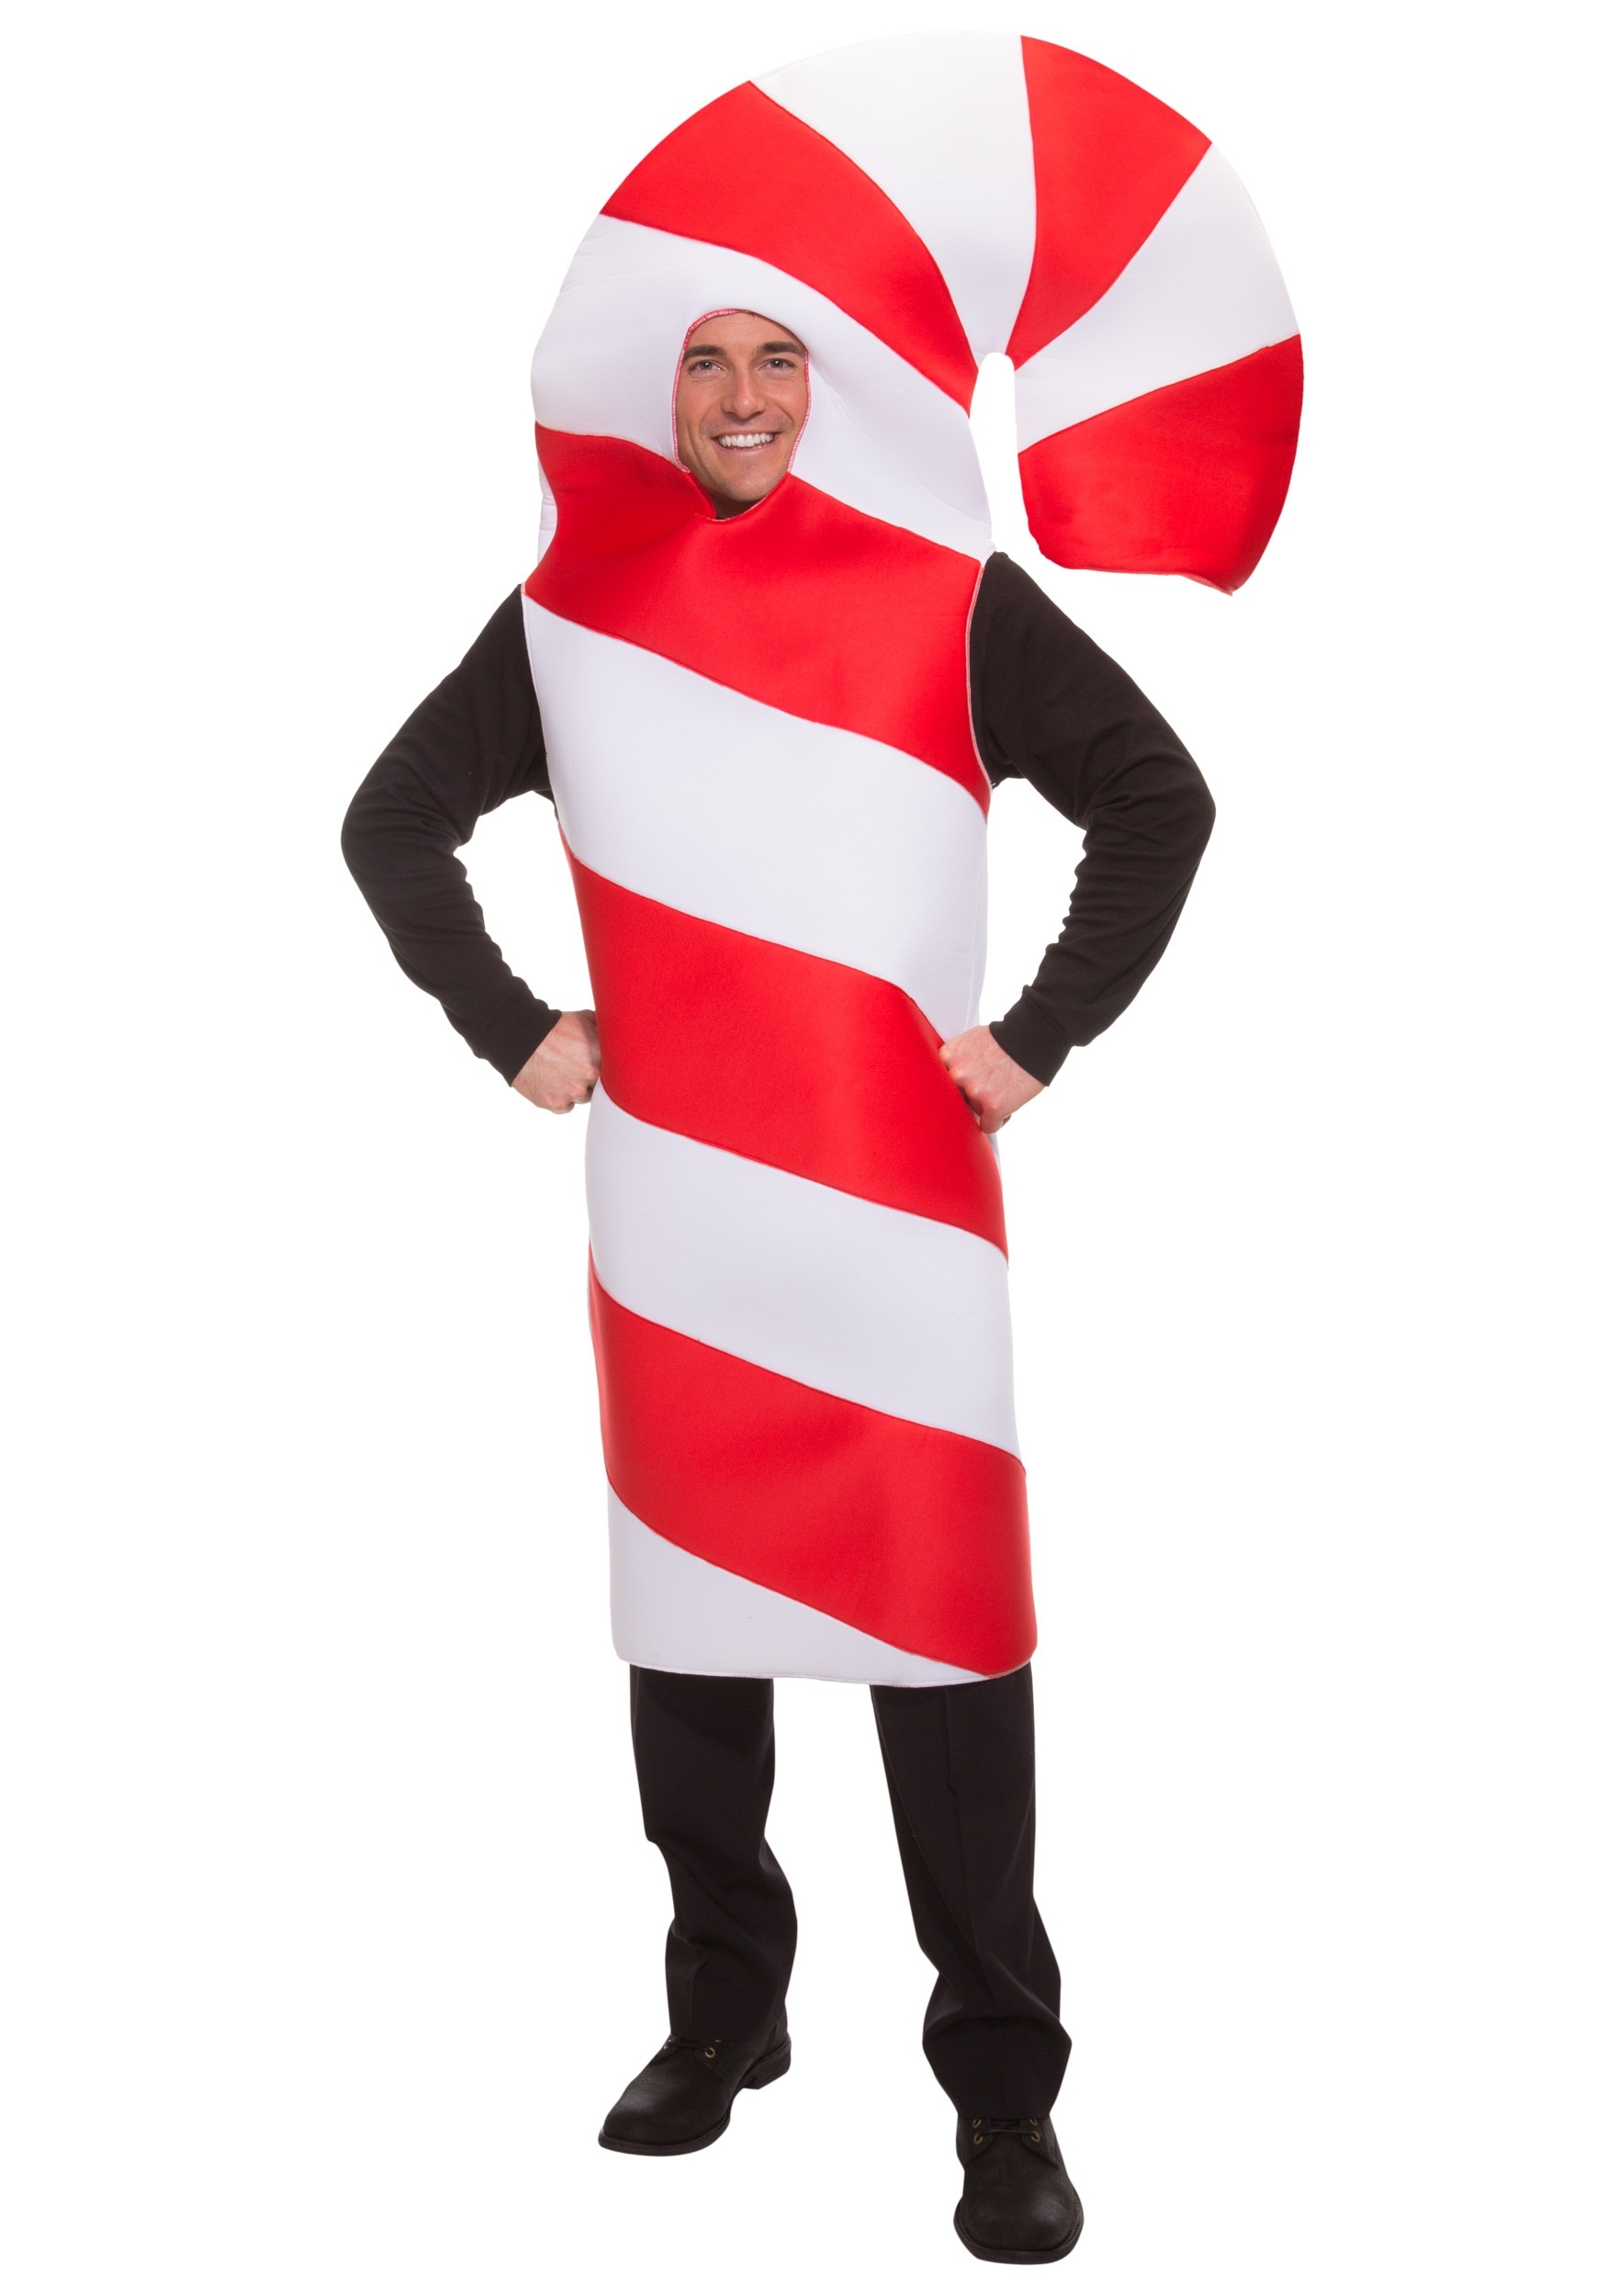 Plus Size Candy Cane Costume